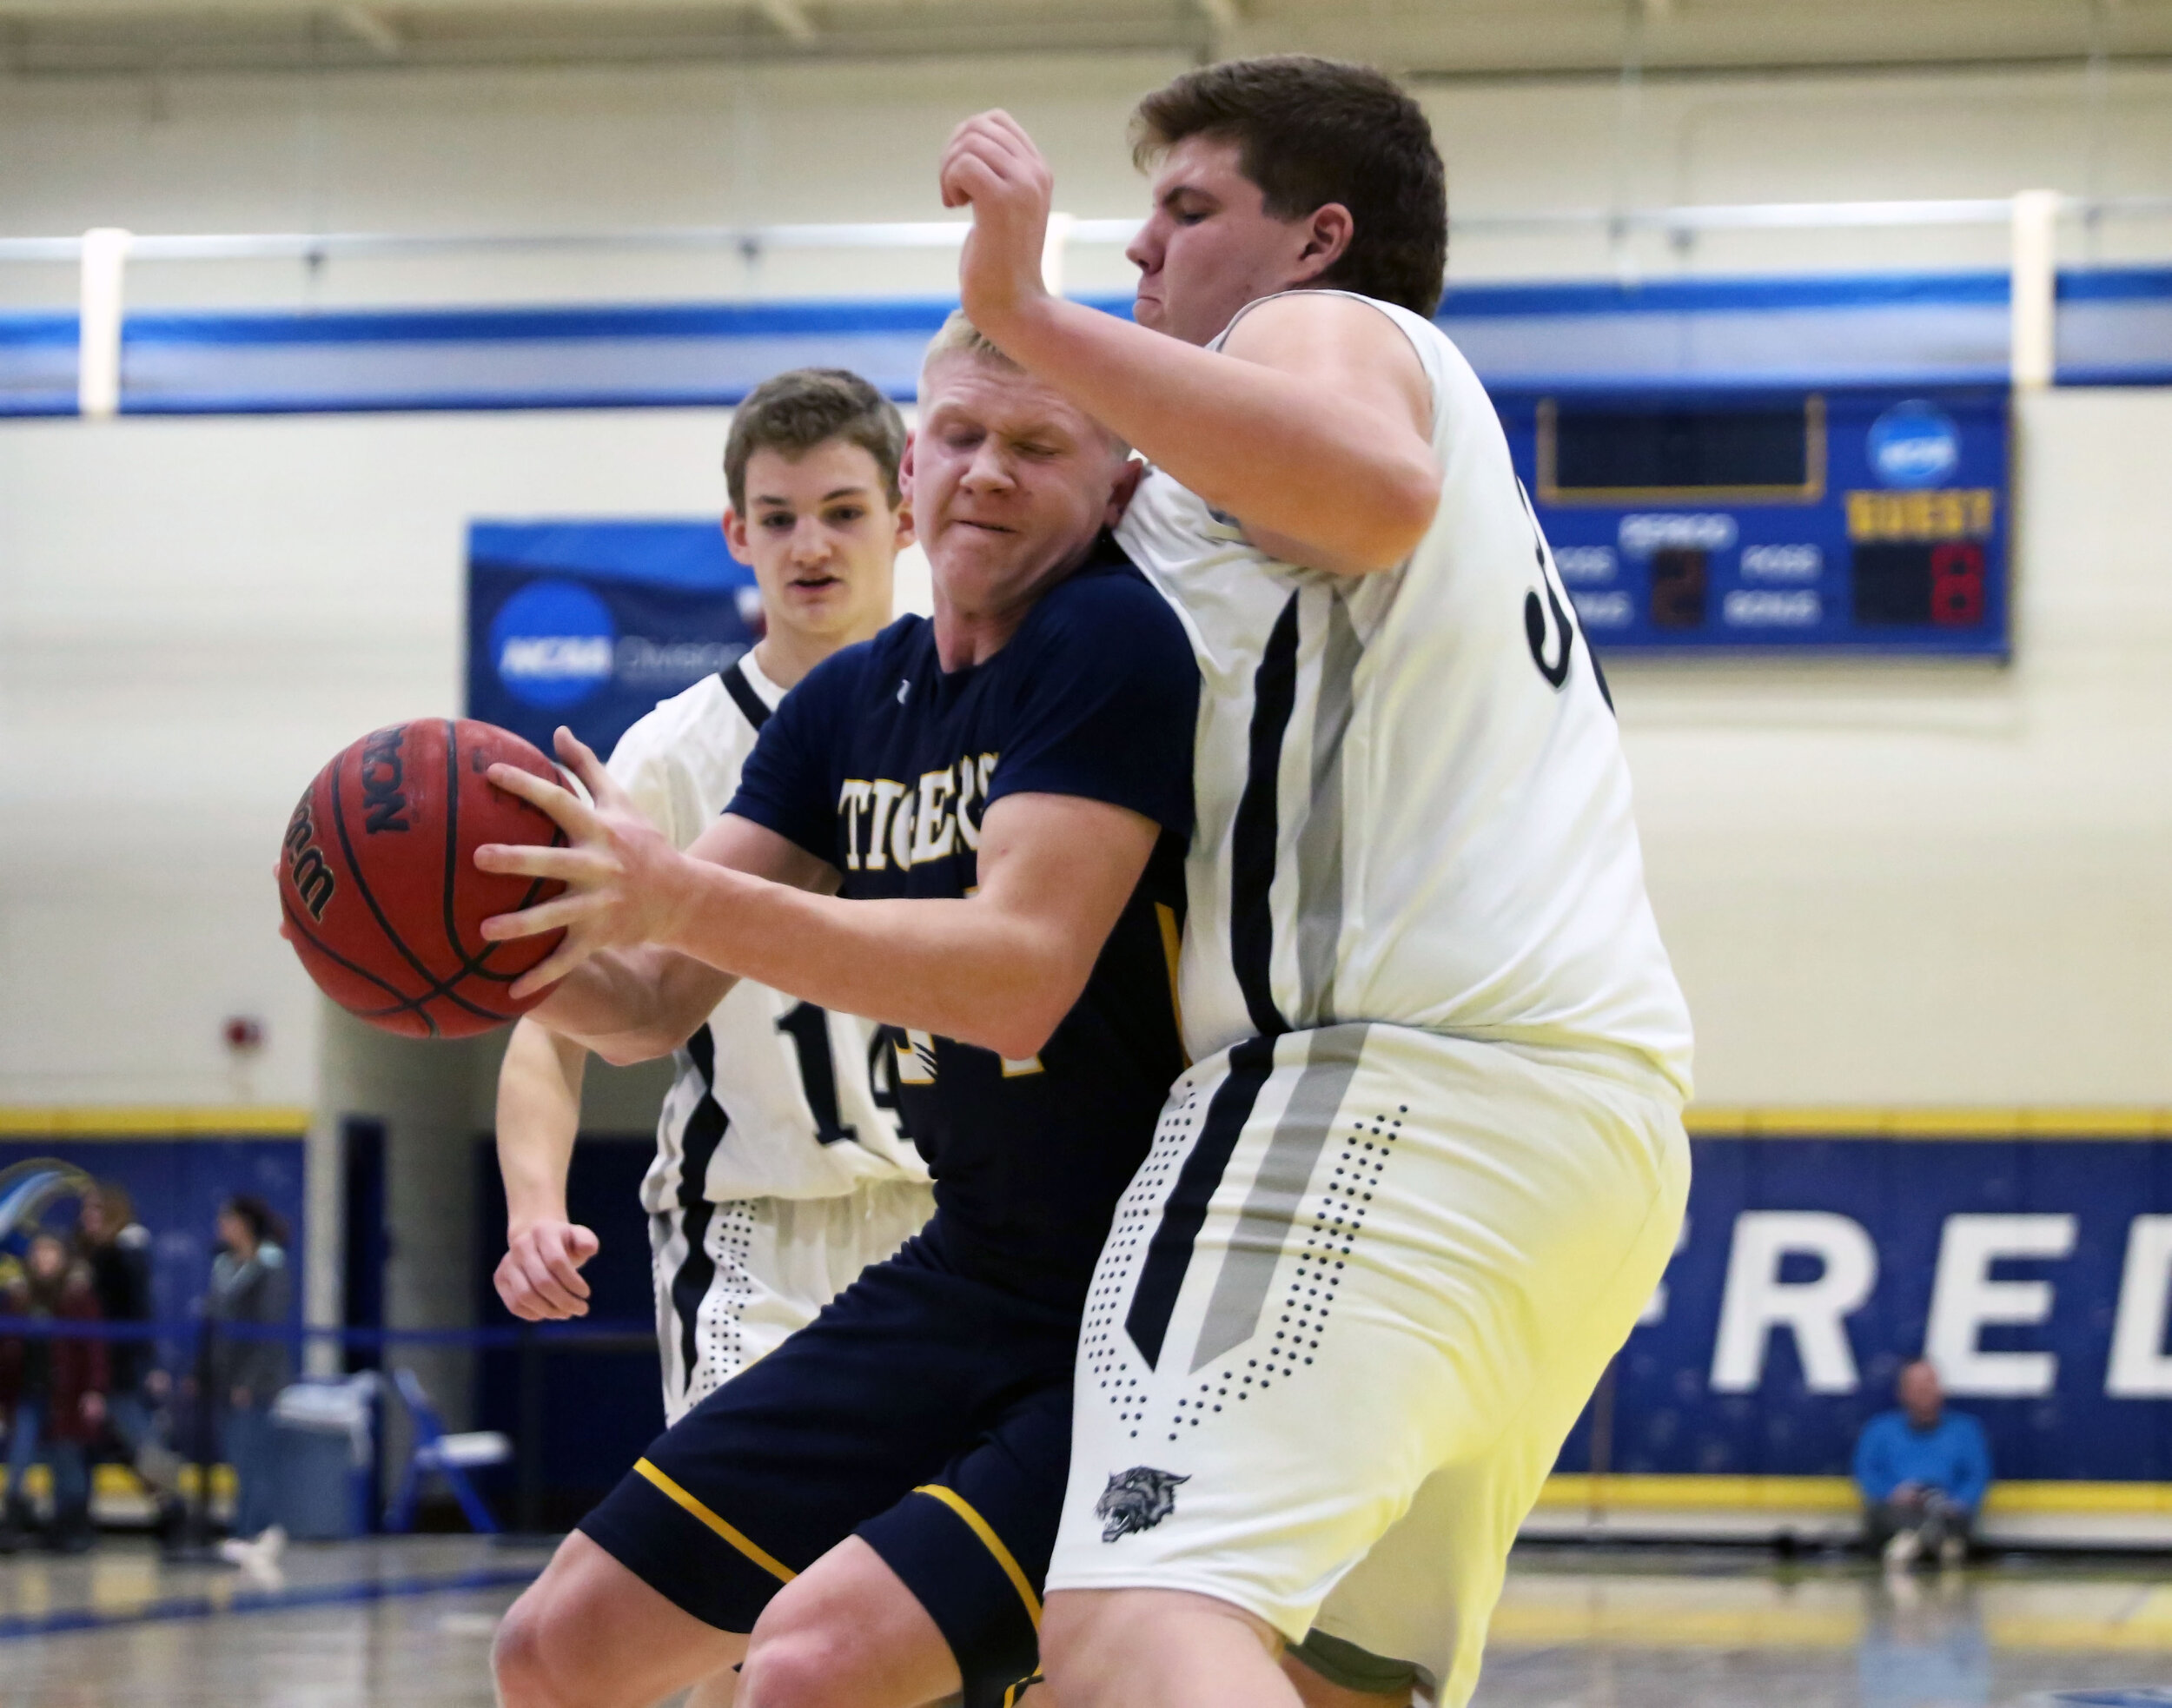  Scio junior Cam Loucks, middle, battles up against the Jasper-Troupsburg defense underneath the basket during game three of the 6th Annual Dan Barkley Showcase at Alfred State College, Saturday evening. [Chris Brooks/WellsvilleSports.com] 